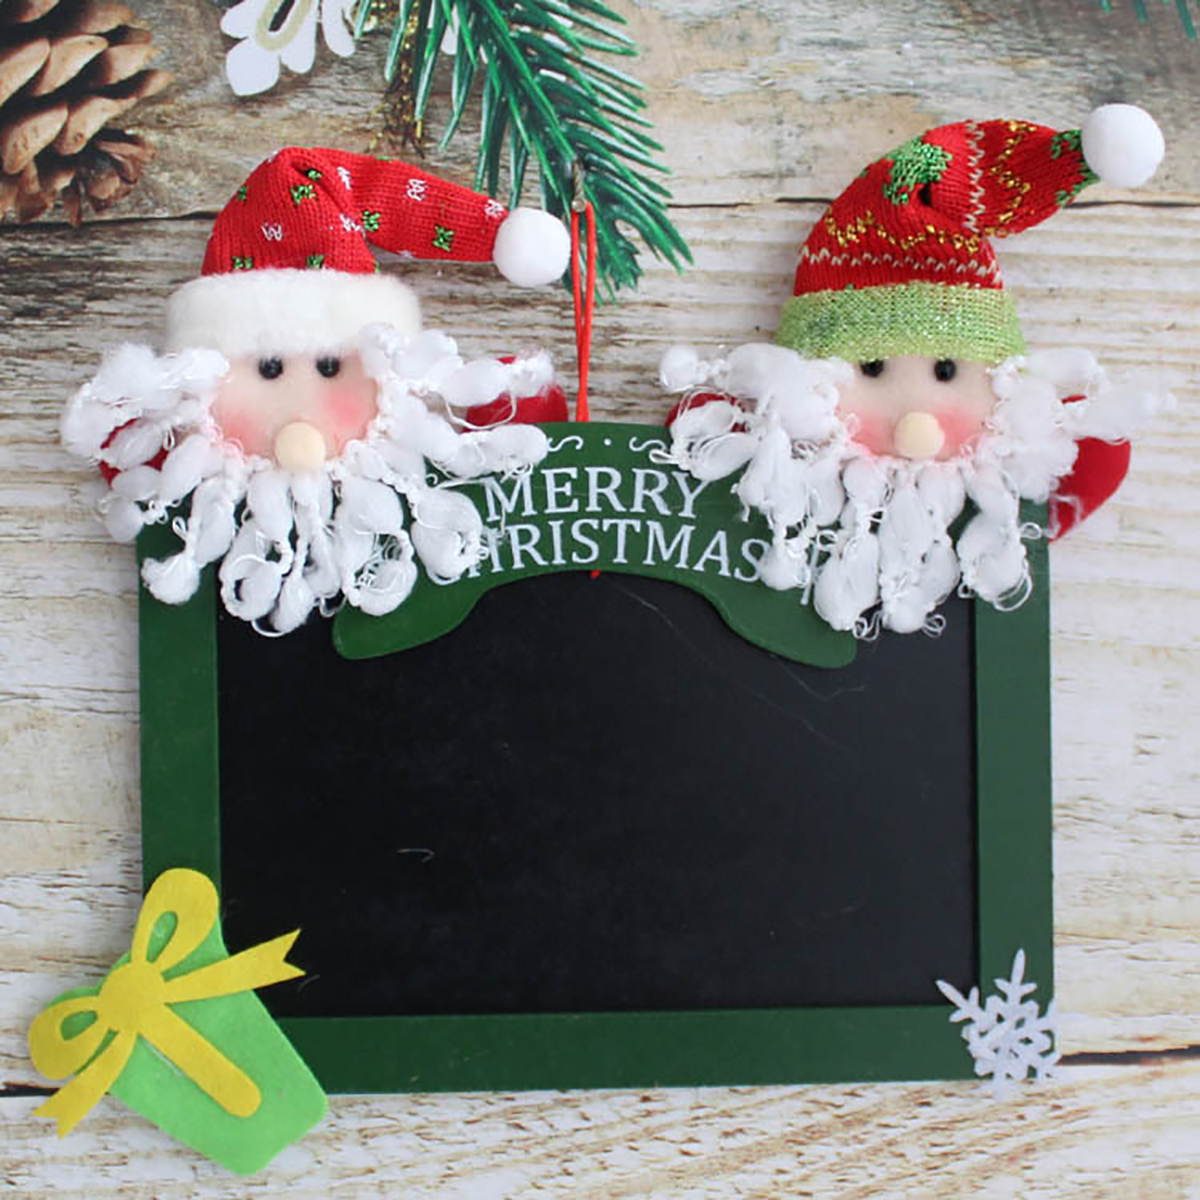 Merry-Christmas-Hanging-Sign-Wooden-Square-Blackboard-Wall-Door-Decoration-Hanging-Tags-for-DIY-Xmas-1904791-3